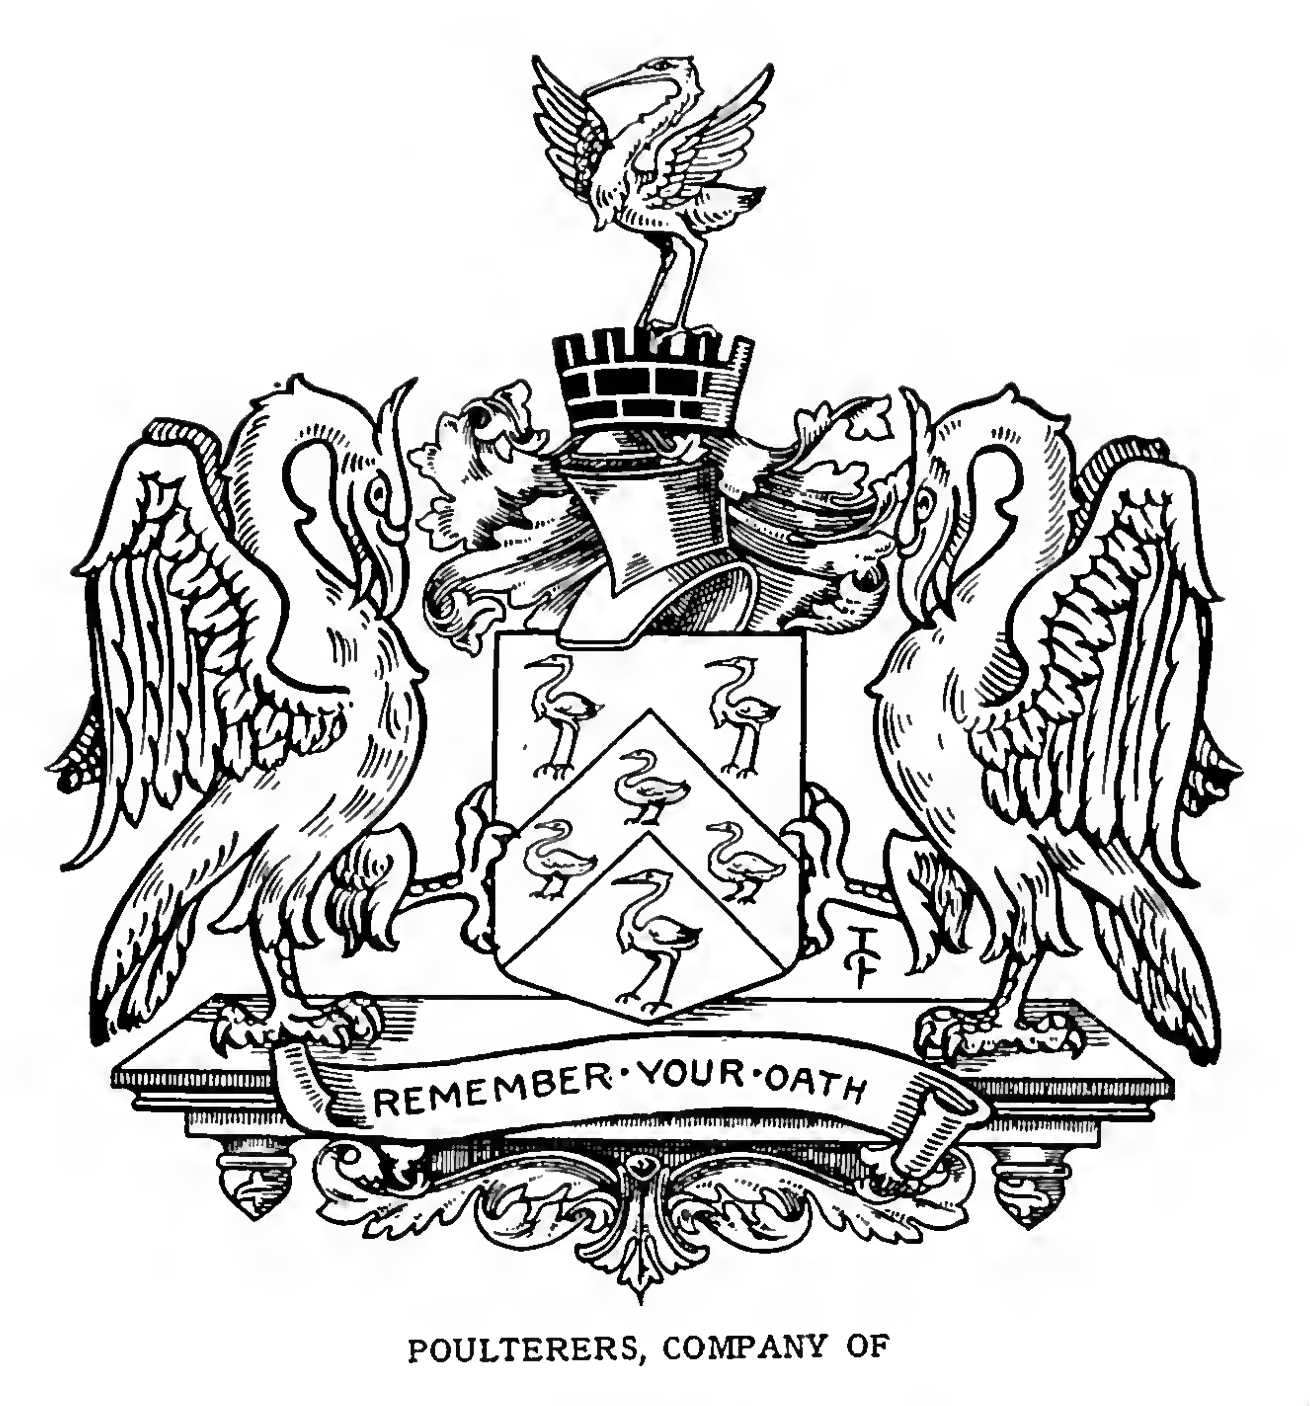 POULTERS, or POULTERERS, The Worshipful Company of, London.